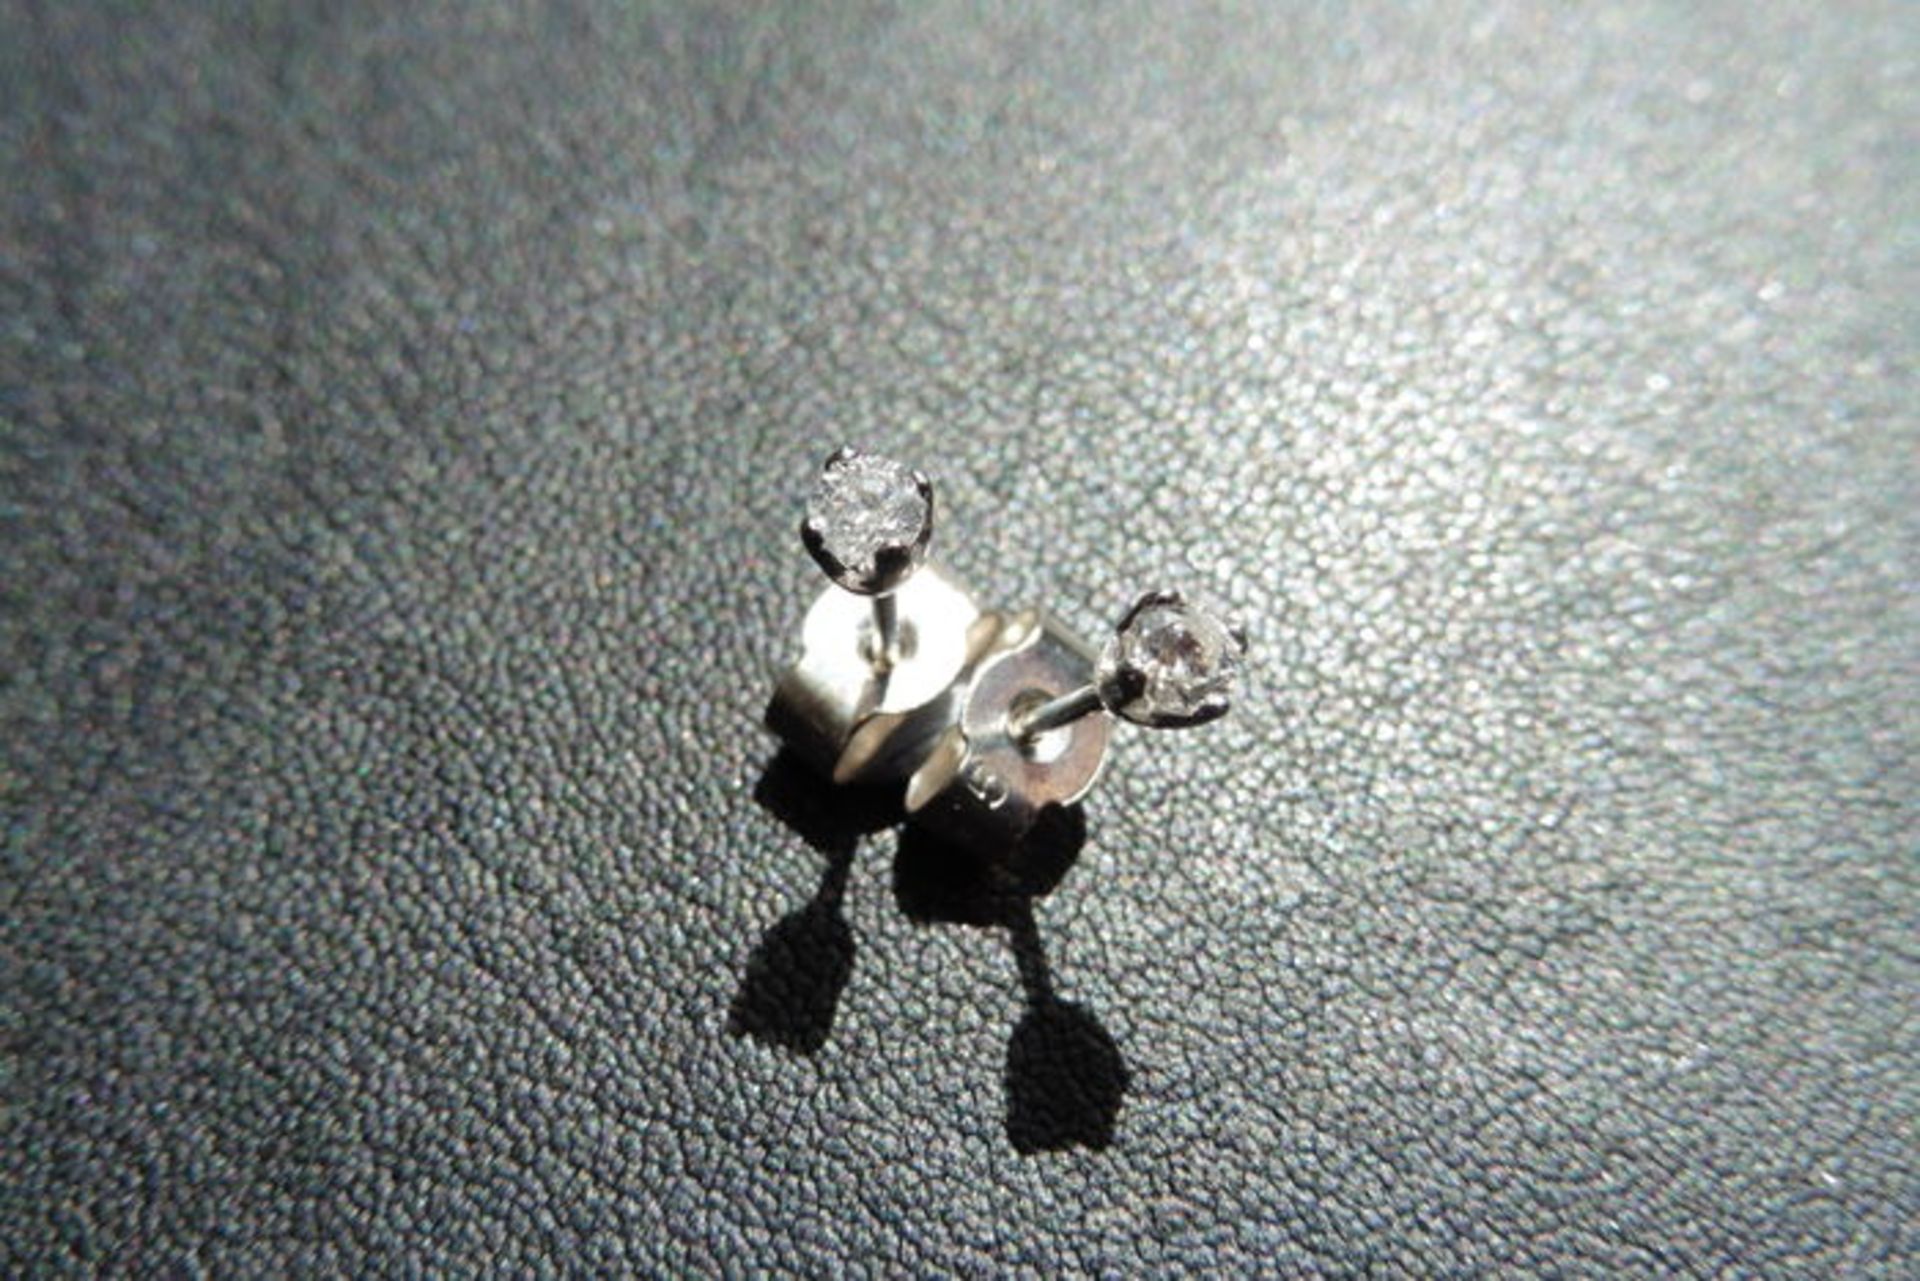 0.10ct Solitaire diamond stud earrings set with brilliant cut diamonds, SI2 clarity and I colour.